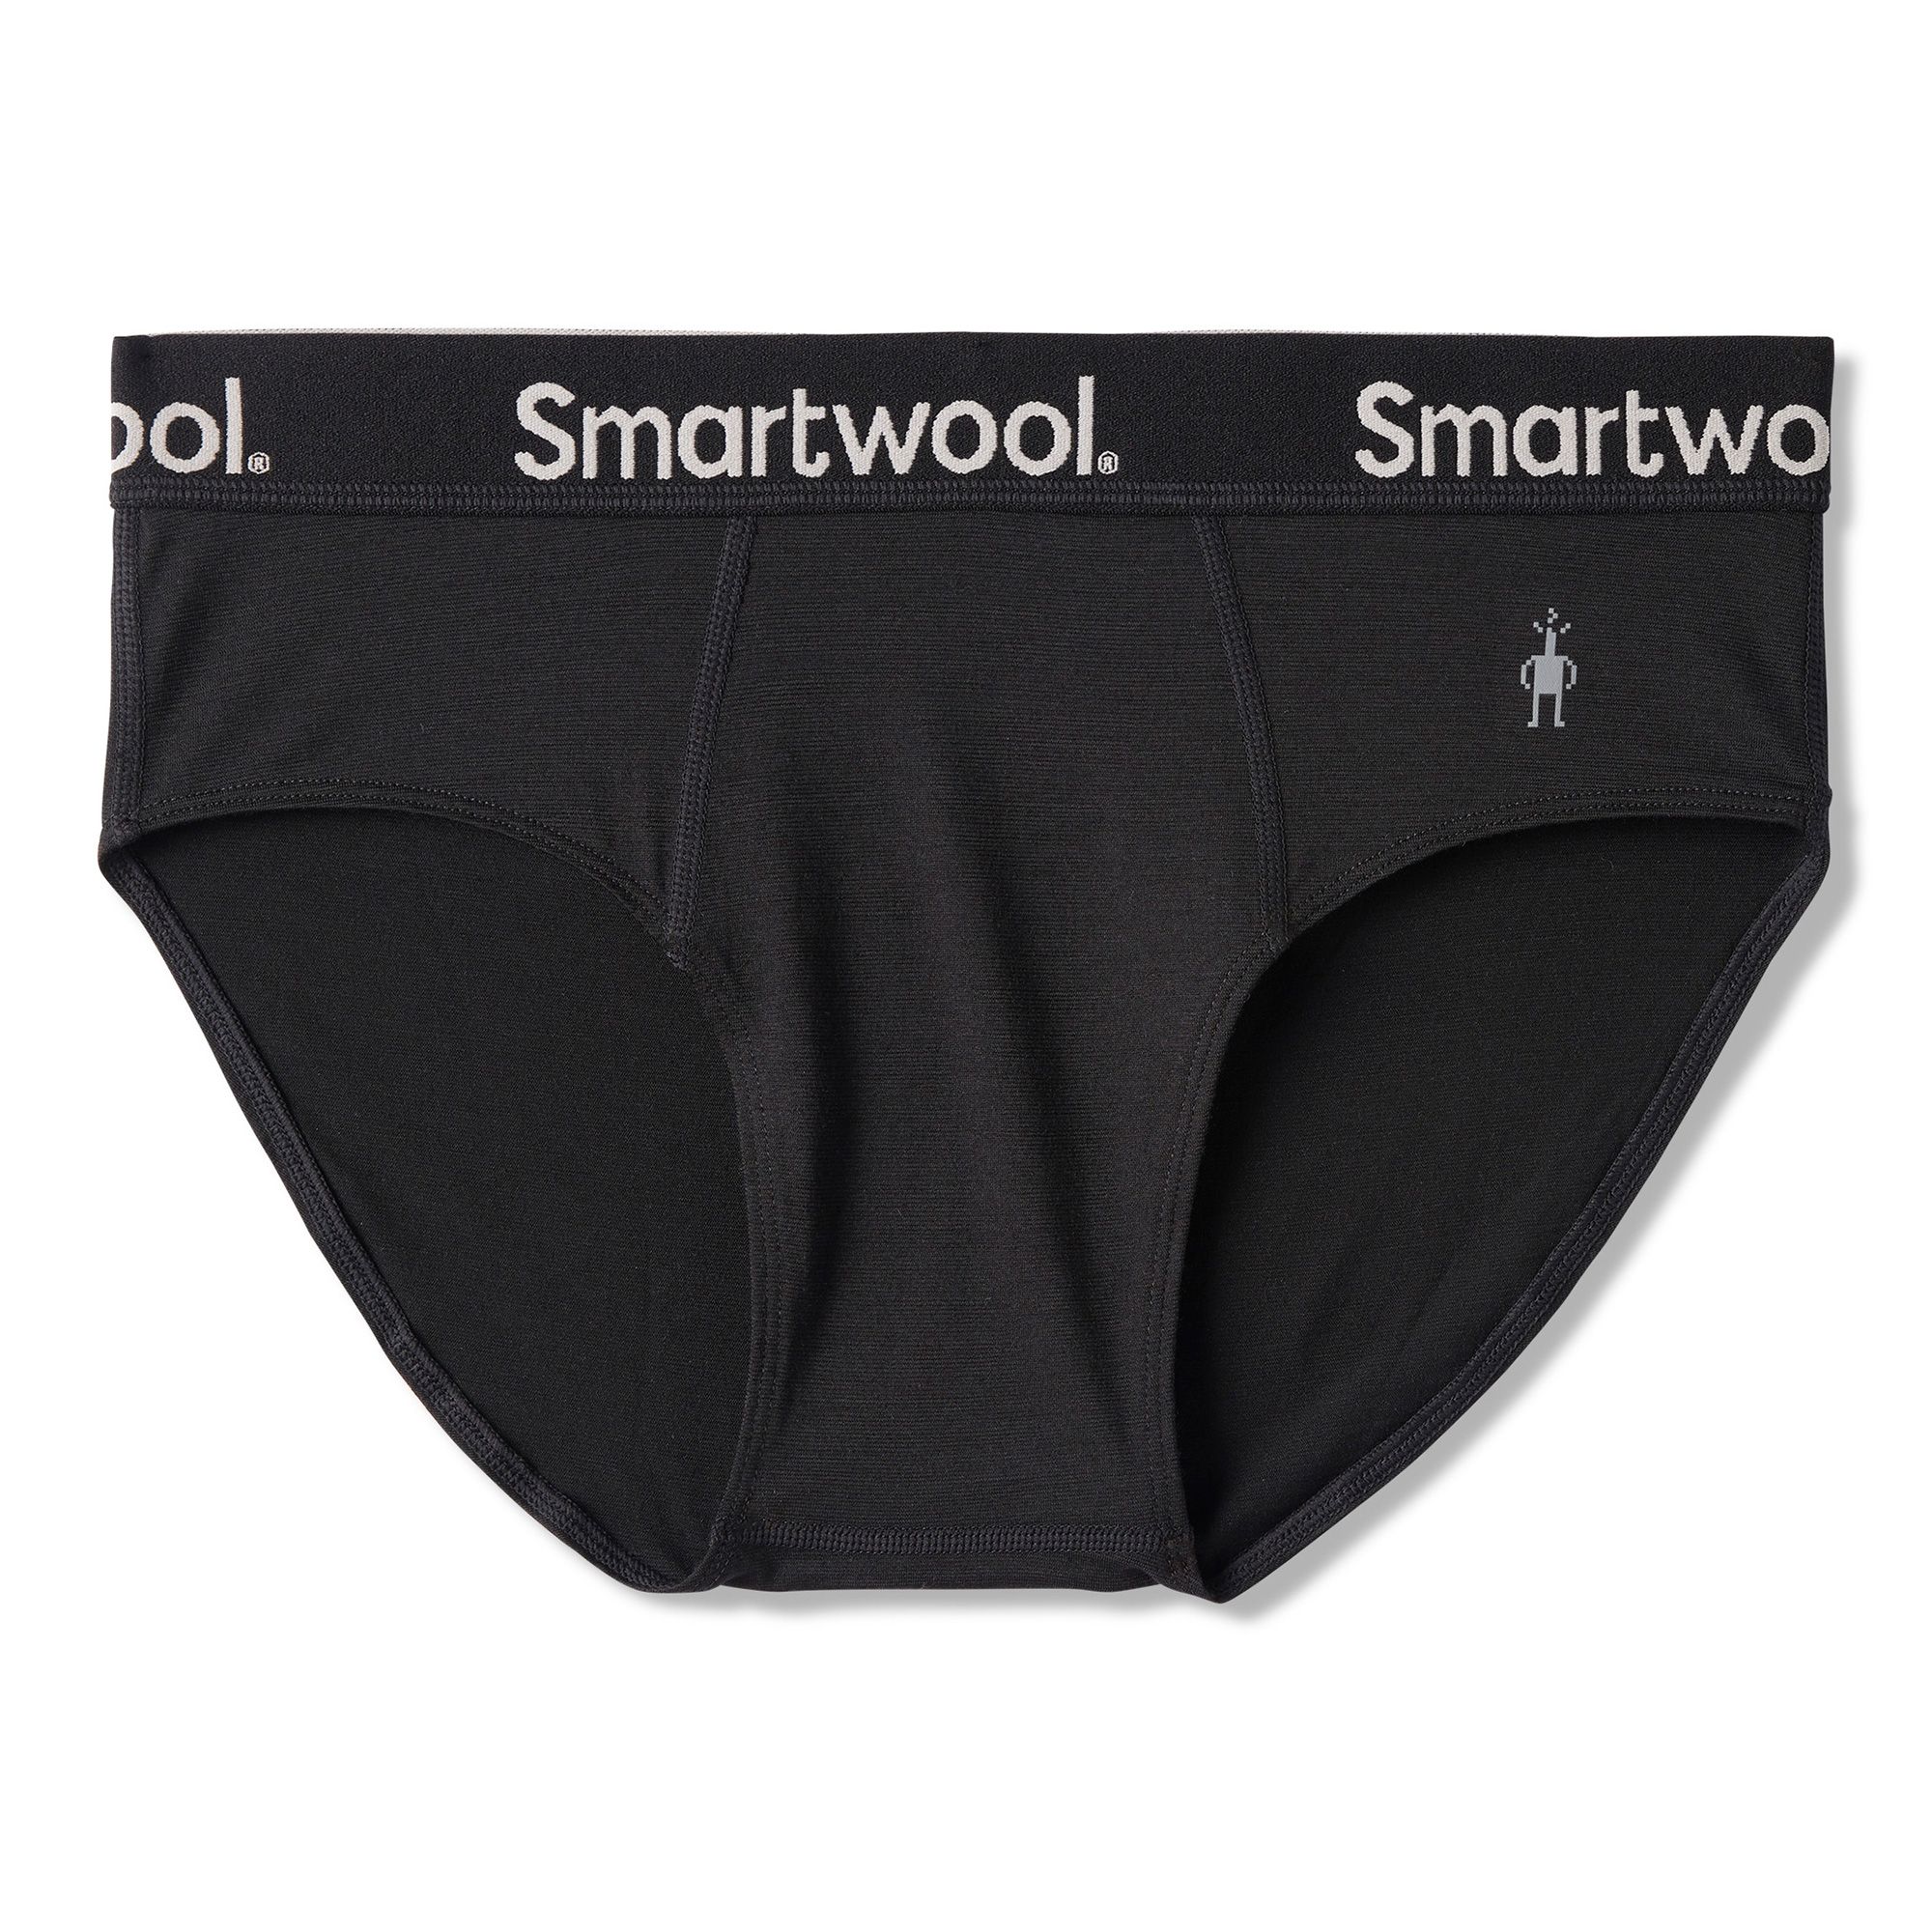  Smartwool Men's Merino Sport Boxer Brief Boxed, Medium Gray  Heather, XX-Large : Clothing, Shoes & Jewelry